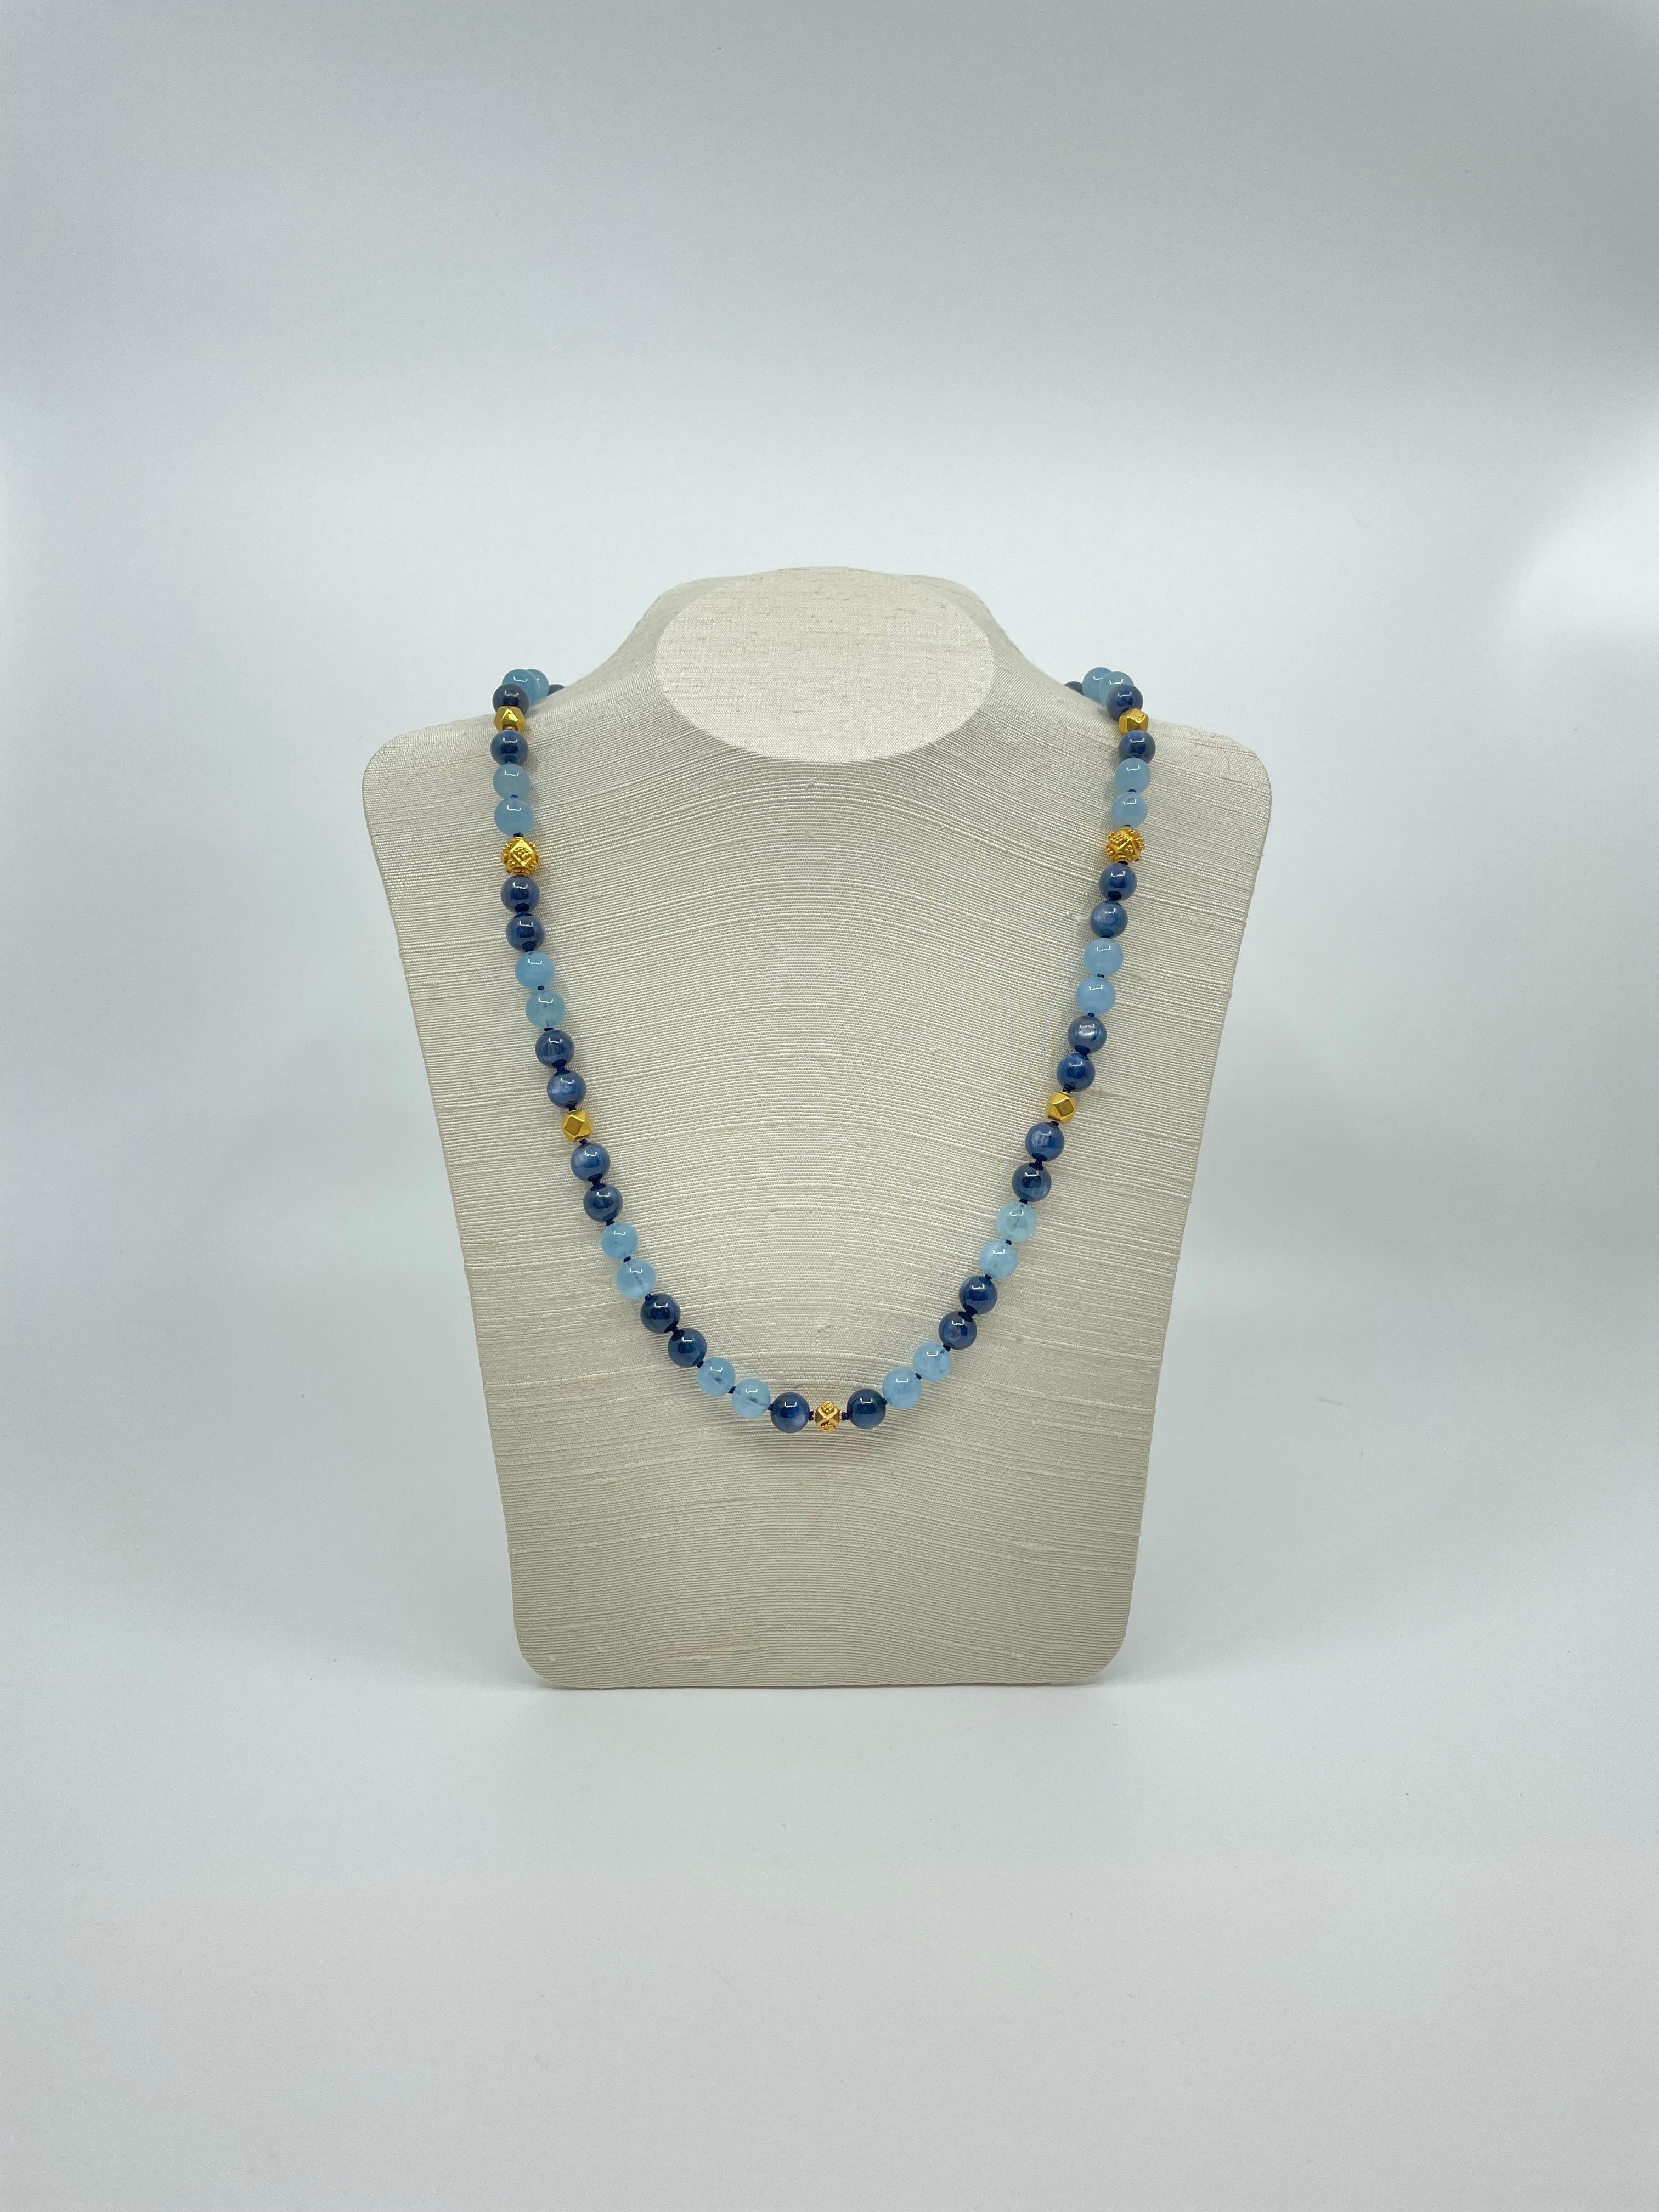 A hand-made necklace of wonderful dark blue kyanite beads, round aquamarine beads, spaced by 18k gold beads and closes with an 18k gold toggle clasp. 
Exquisite for summer days and nights.
Length: 22.5